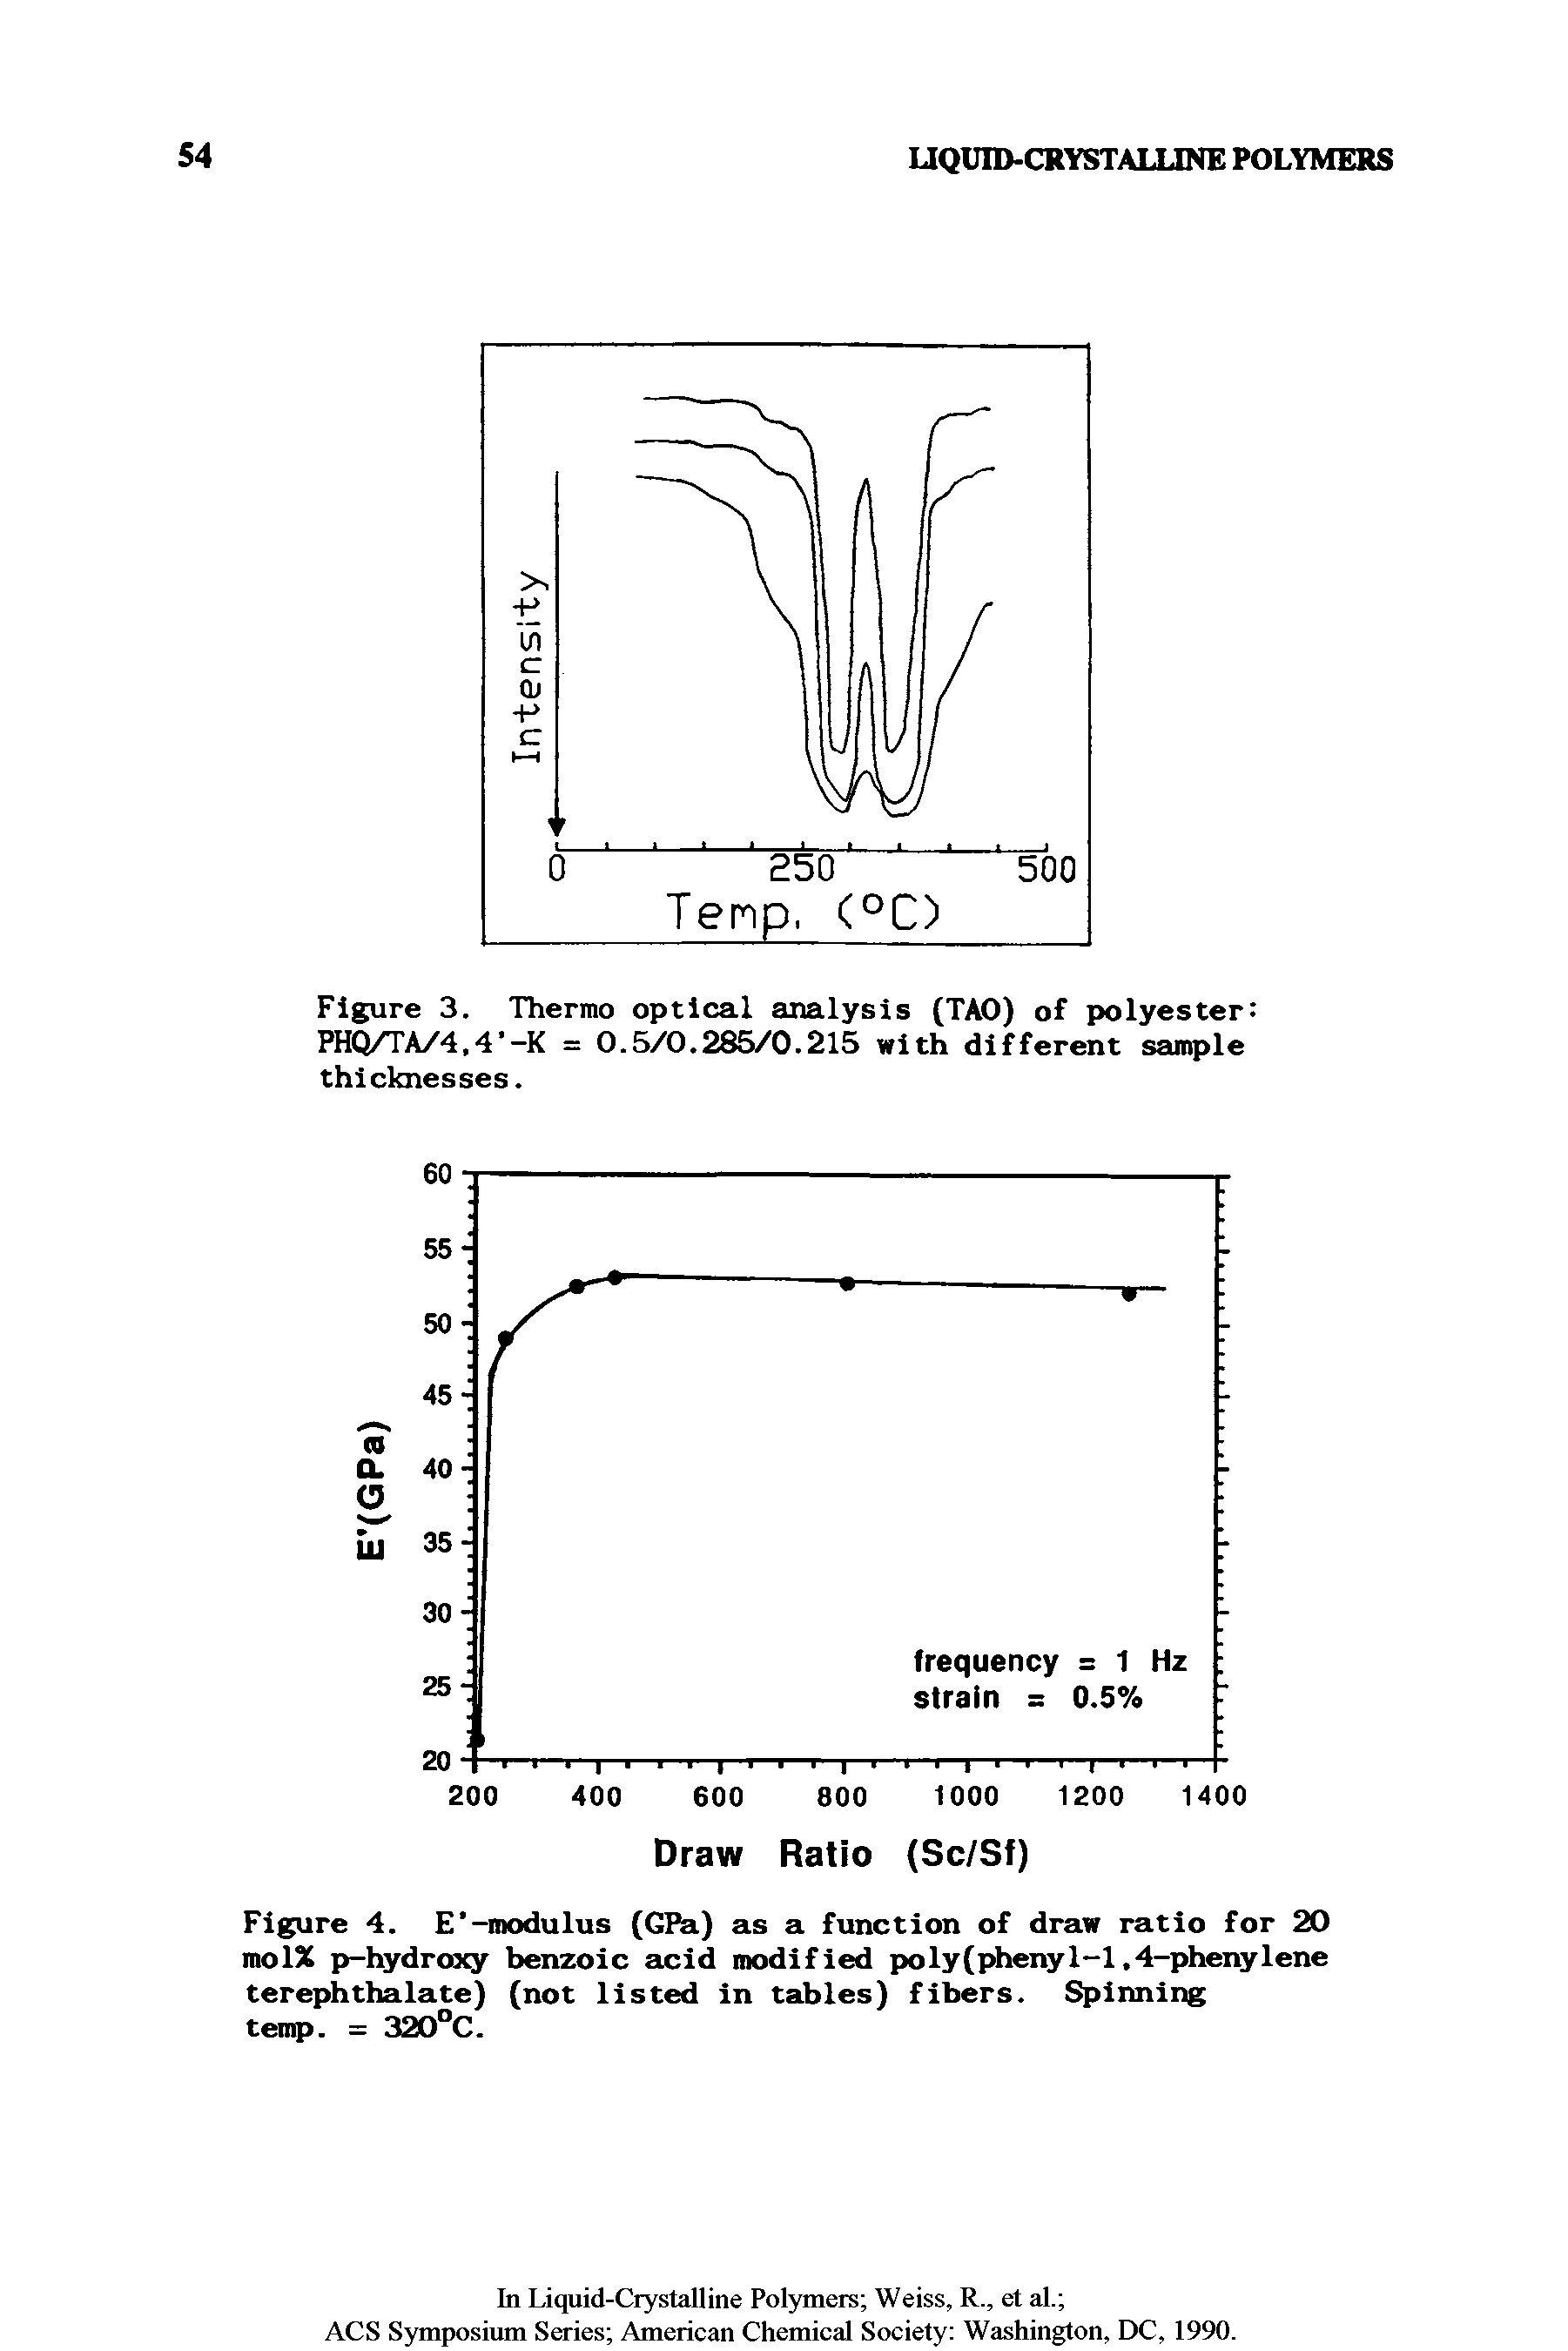 Figure 4. E -modulus (GPa) as a function of draw ratio for 20 mol% p-hydraxy benzoic acid modified poly(phenyl-l,4-phenylene terephthalate) (not listed in tables) fibers. Spinning temp. = 320°C.